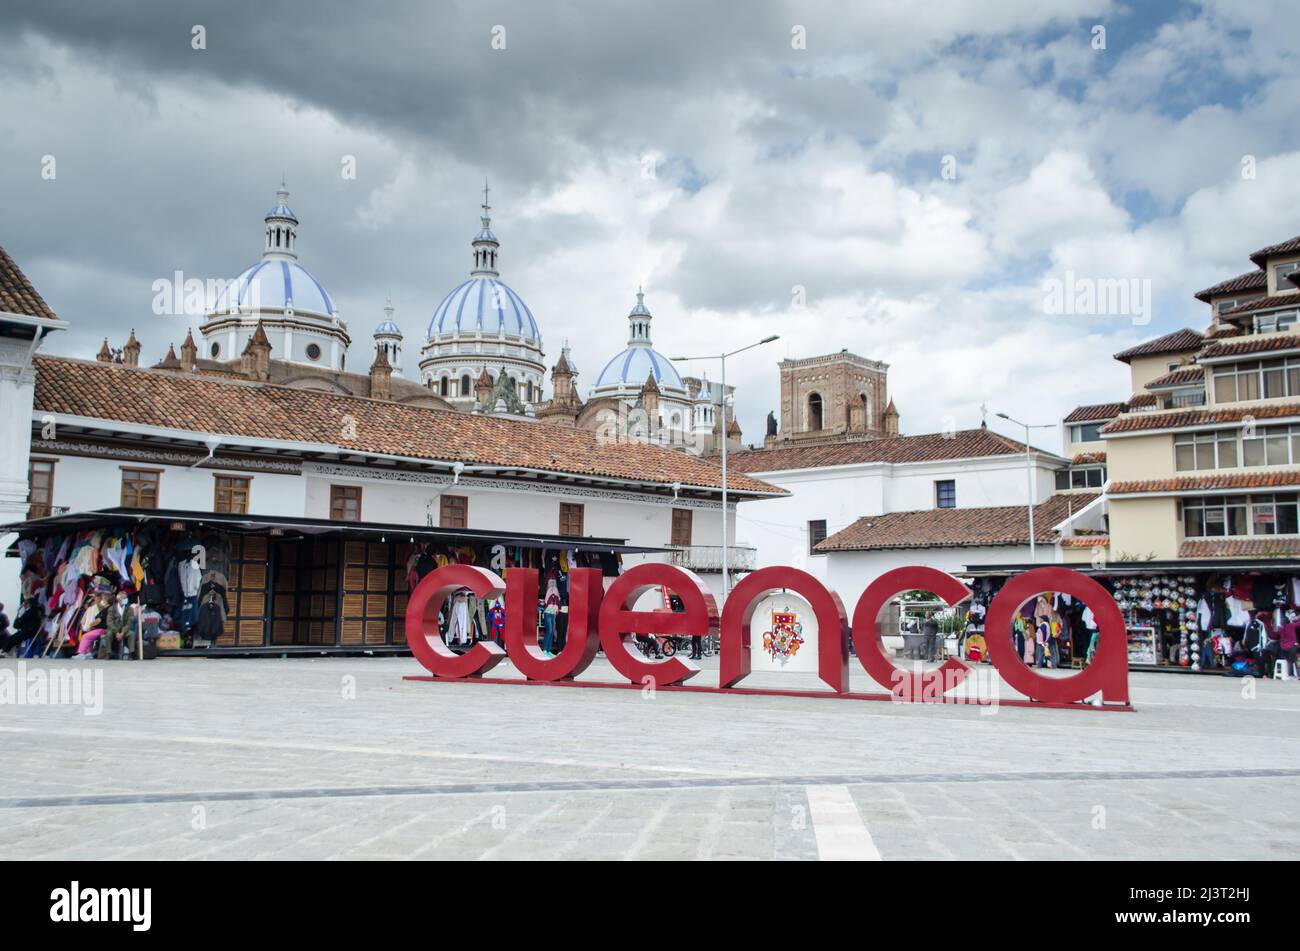 San Francisco Square in Cuenca. Cuenca welcome sign is seen on the right and the domes of Cathedral of Cuenca is seen in the distance Stock Photo